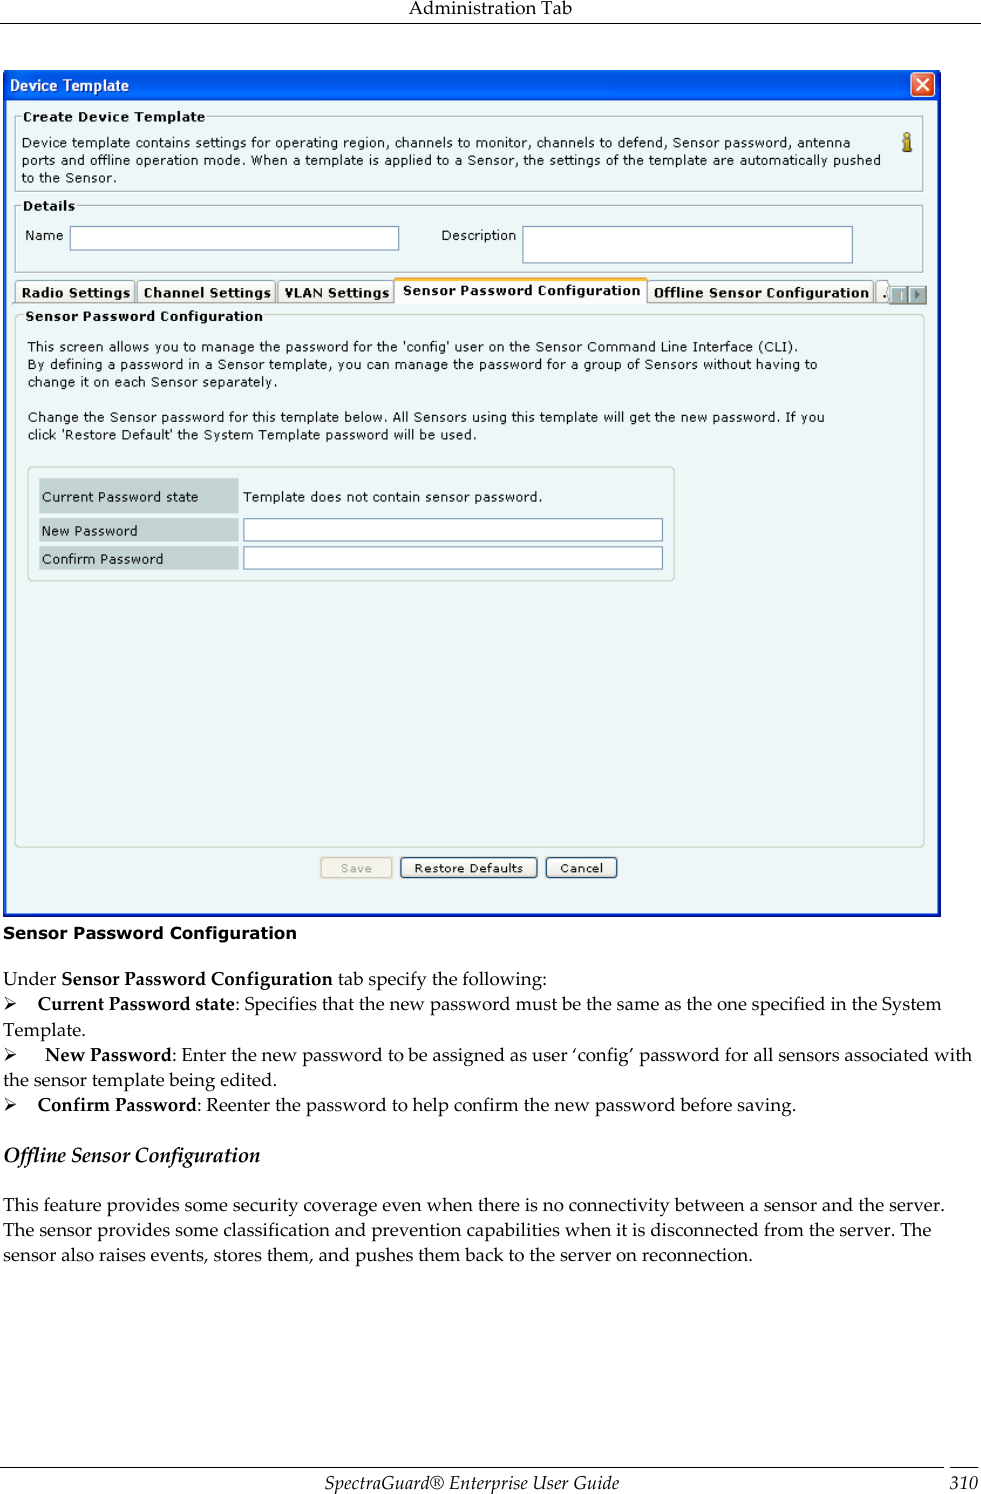 Administration Tab SpectraGuard®  Enterprise User Guide 310  Sensor Password Configuration   Under Sensor Password Configuration tab specify the following:      Current Password state: Specifies that the new password must be the same as the one specified in the System Template.        New Password: Enter the new password to be assigned as user ‘config’ password for all sensors associated with the sensor template being edited.      Confirm Password: Reenter the password to help confirm the new password before saving. Offline Sensor Configuration This feature provides some security coverage even when there is no connectivity between a sensor and the server. The sensor provides some classification and prevention capabilities when it is disconnected from the server. The sensor also raises events, stores them, and pushes them back to the server on reconnection.   